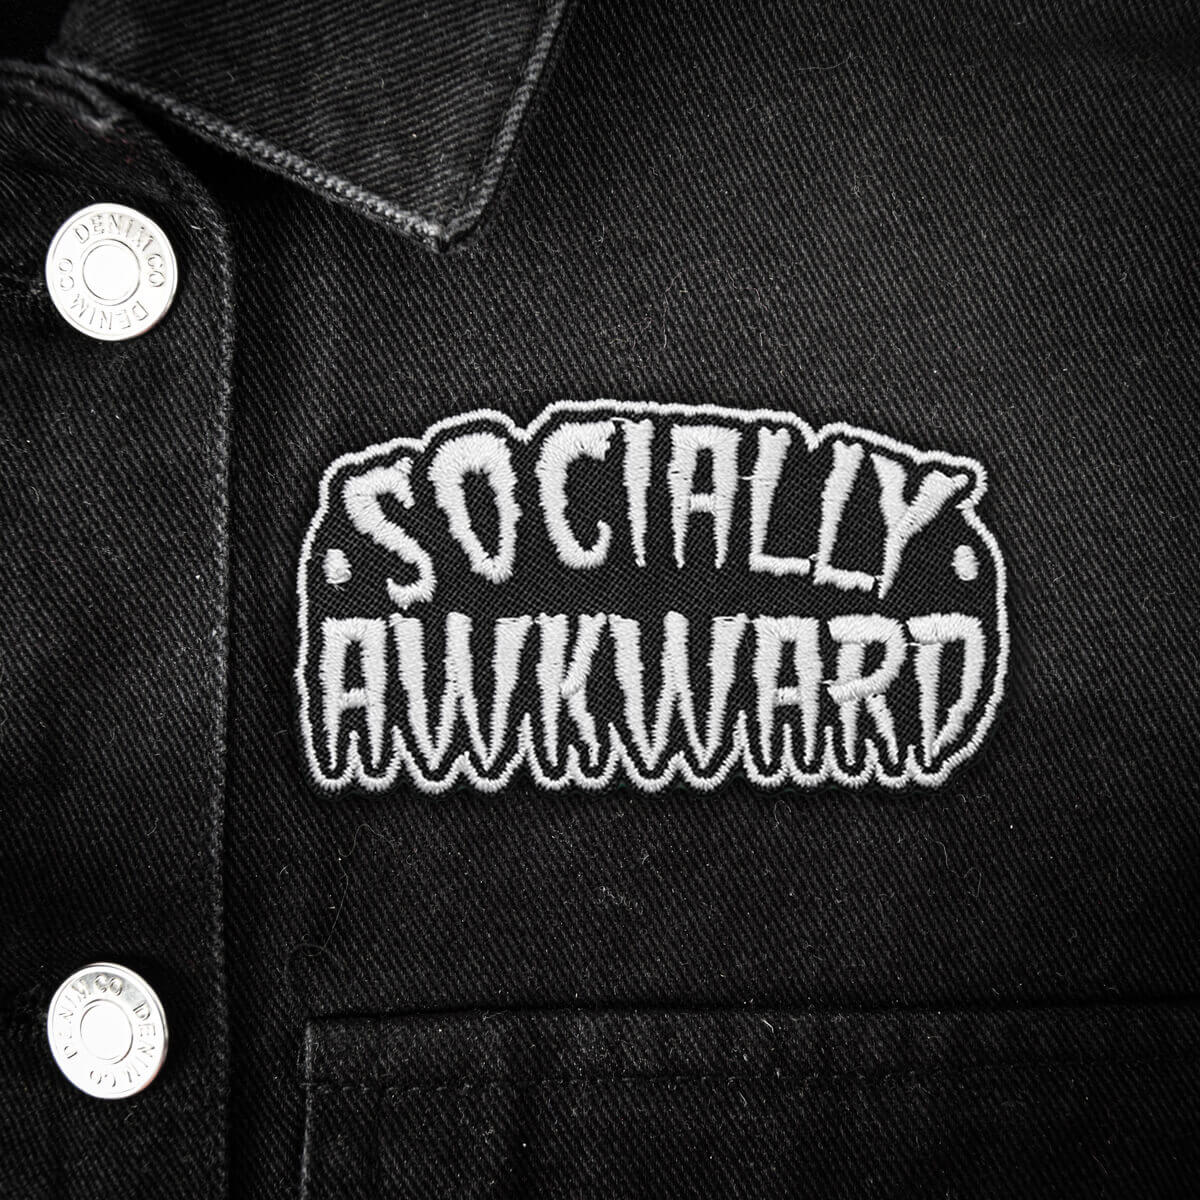 Socially Awkward Patch | Extreme Largeness Wholesale